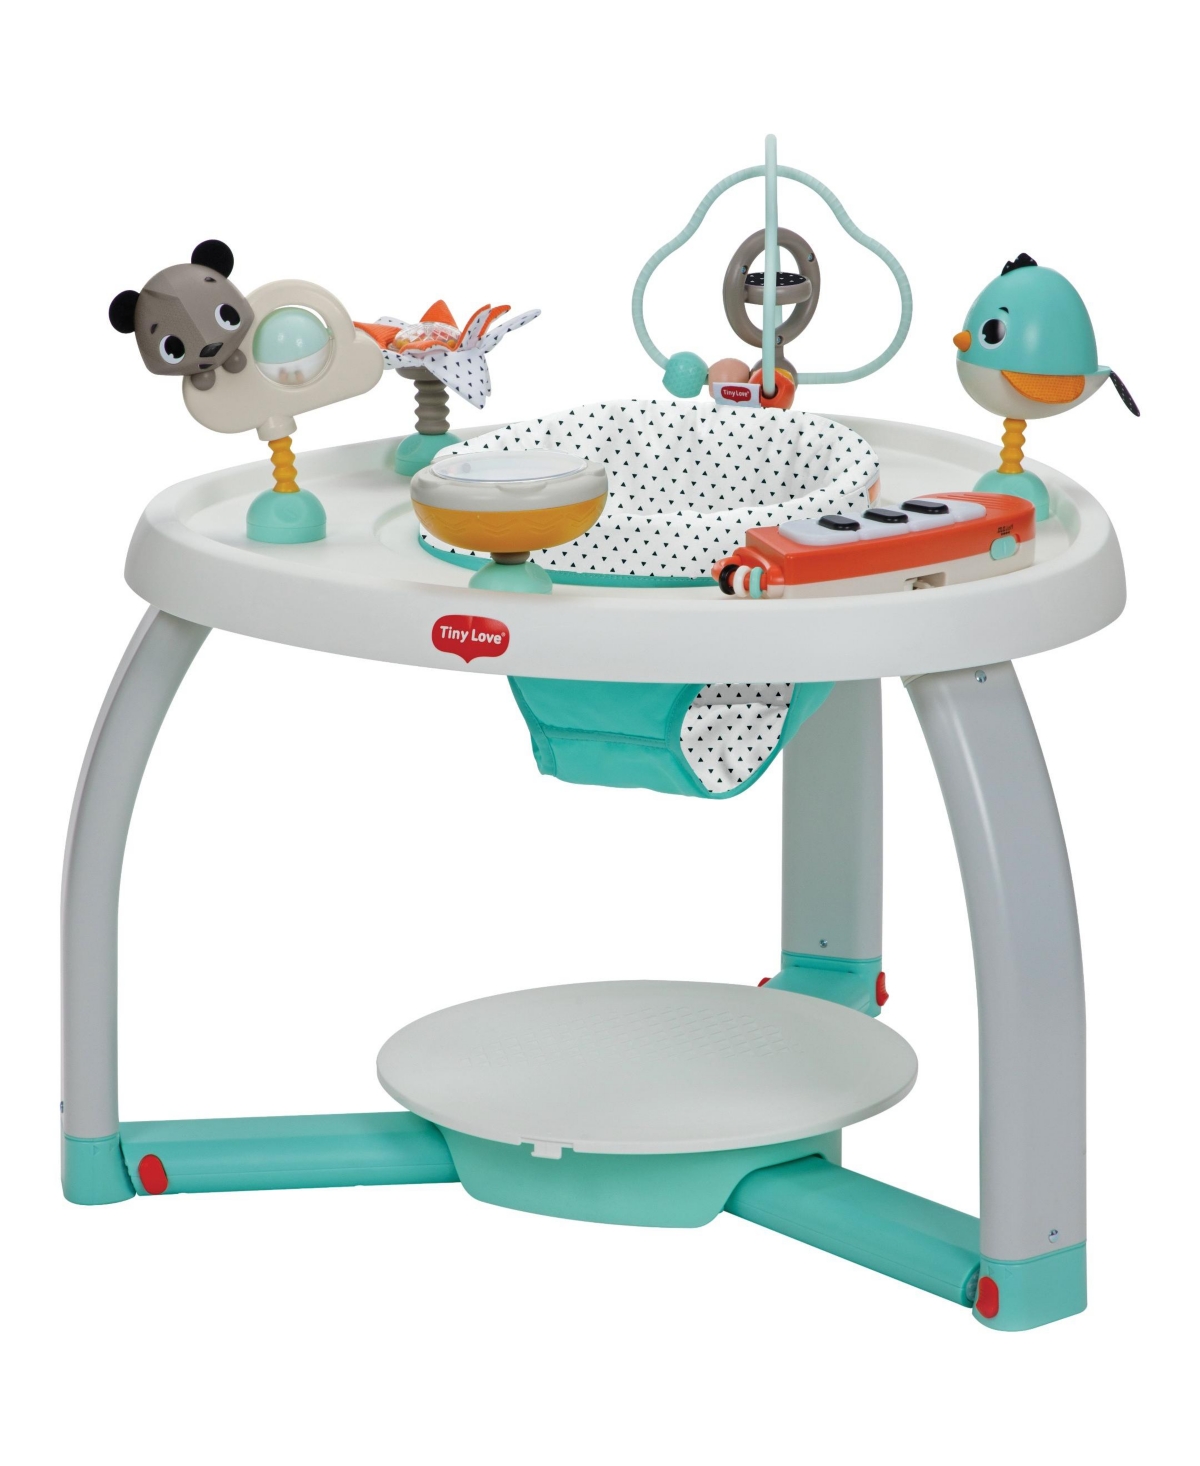 Tiny Love Infant And Toddler Stationary Activity Center In Magical Tales